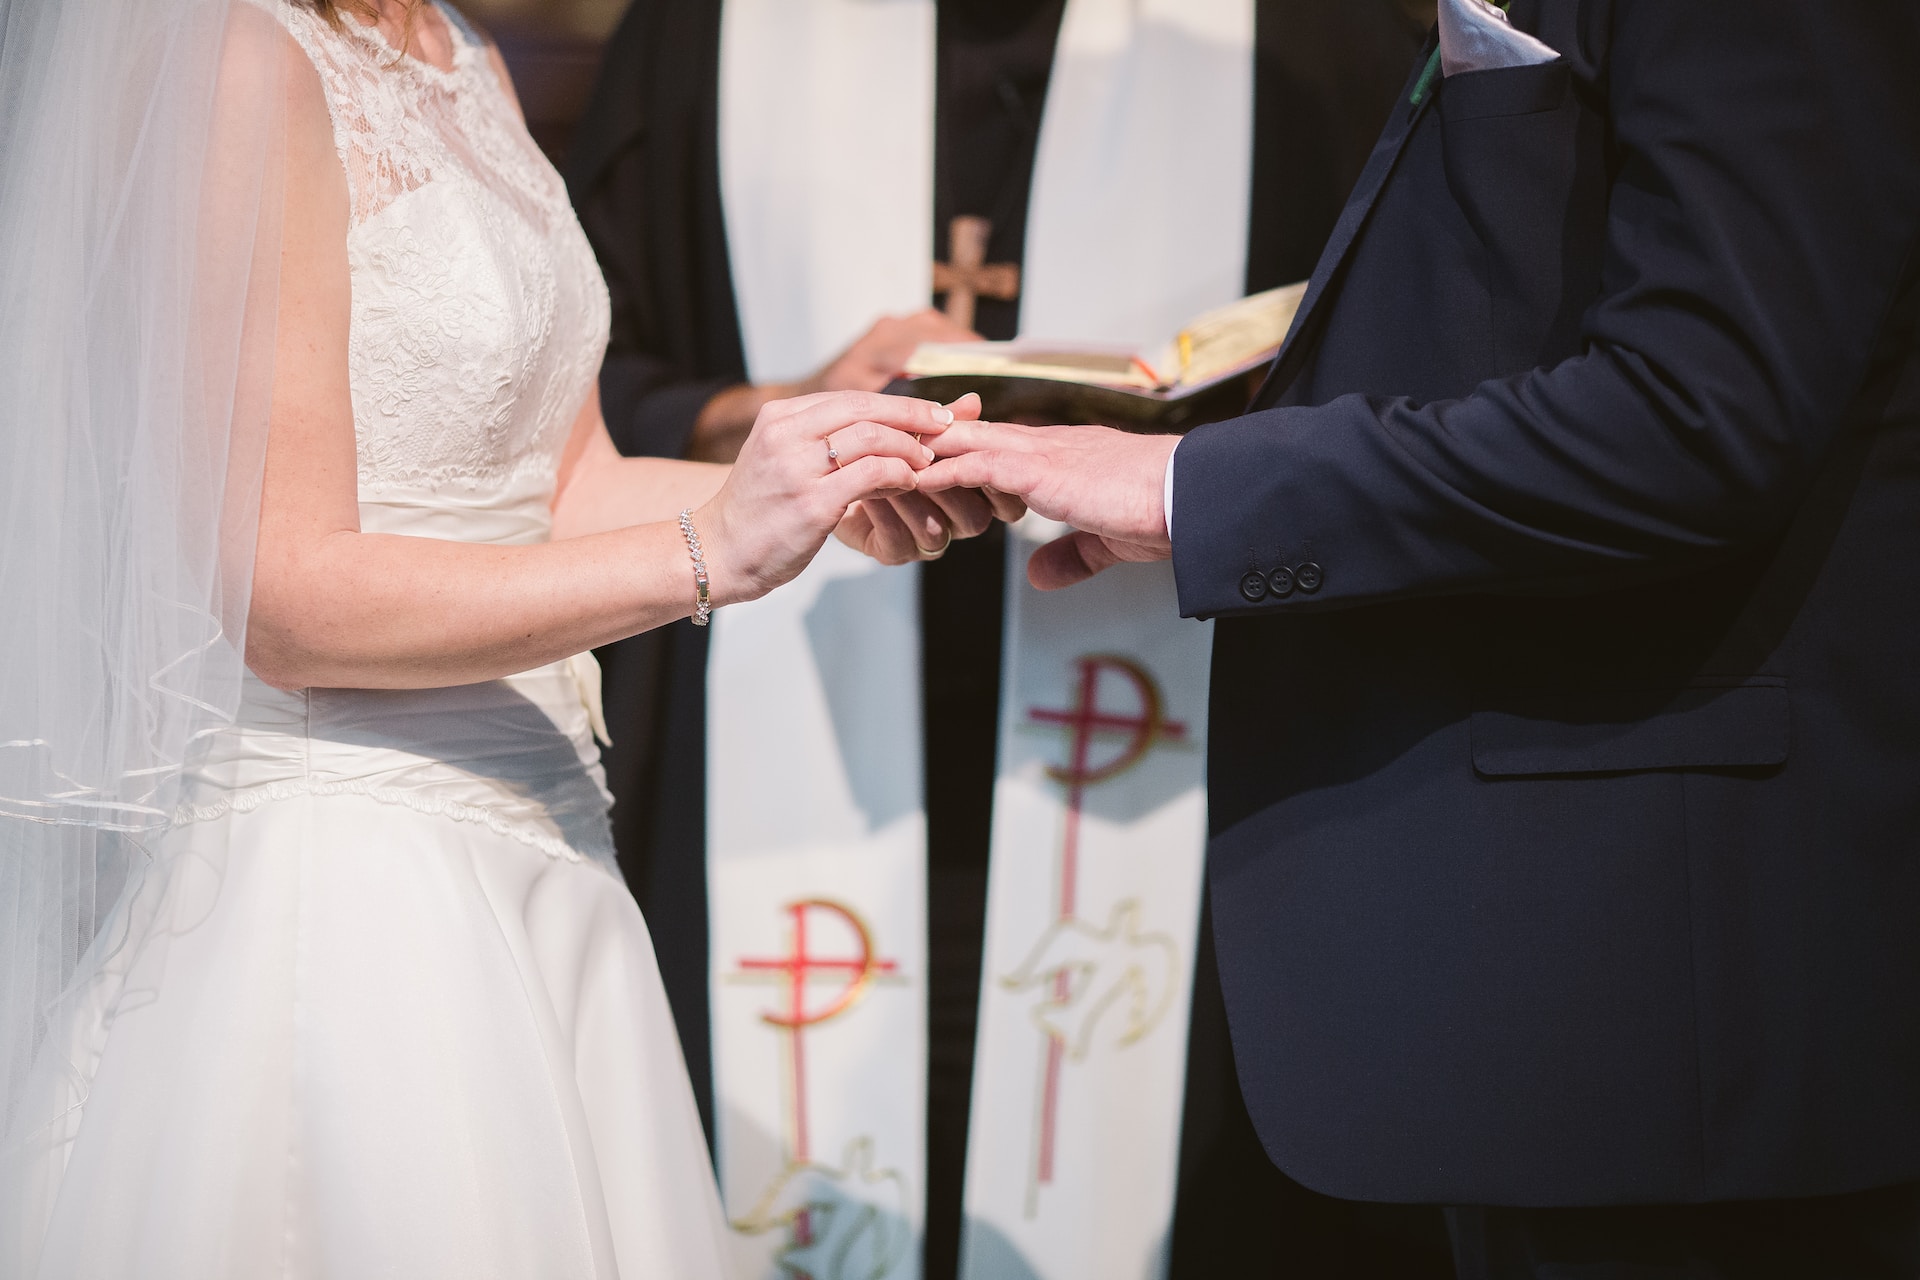 A bride and groom exchanging rings at their wedding Mass